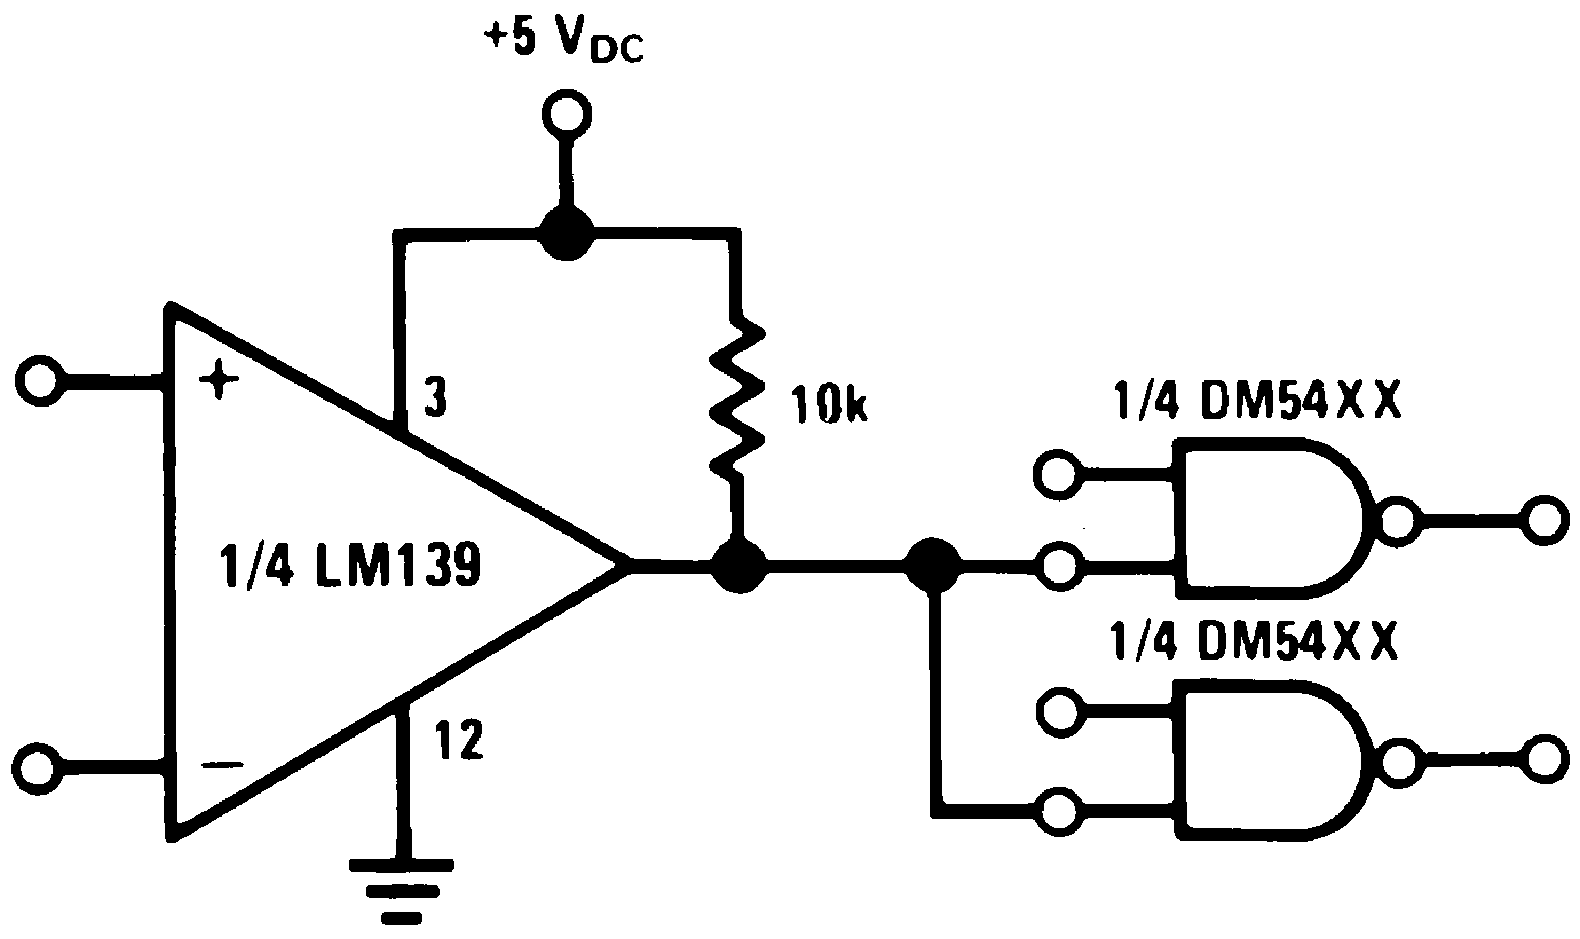 LM339-MIL lm339-mil-driving-ttl-schematic.png